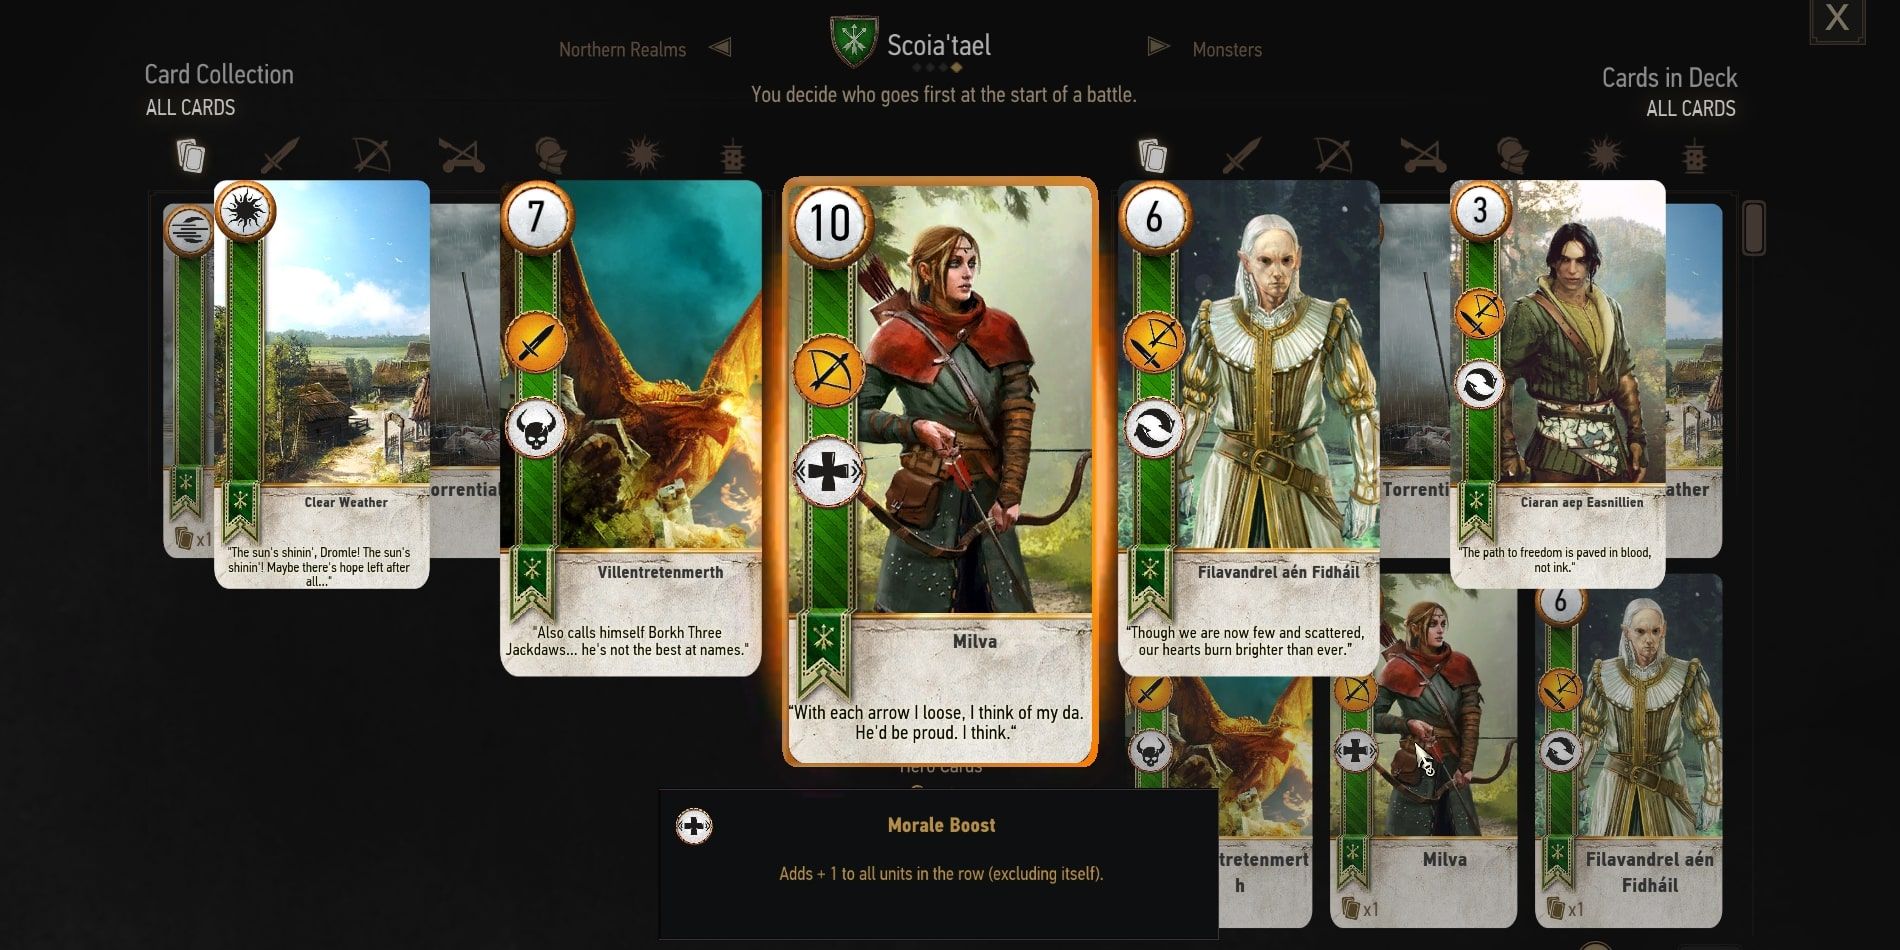 Milva's Gwent Card in a Scoiatael Deck in The Witcher 3